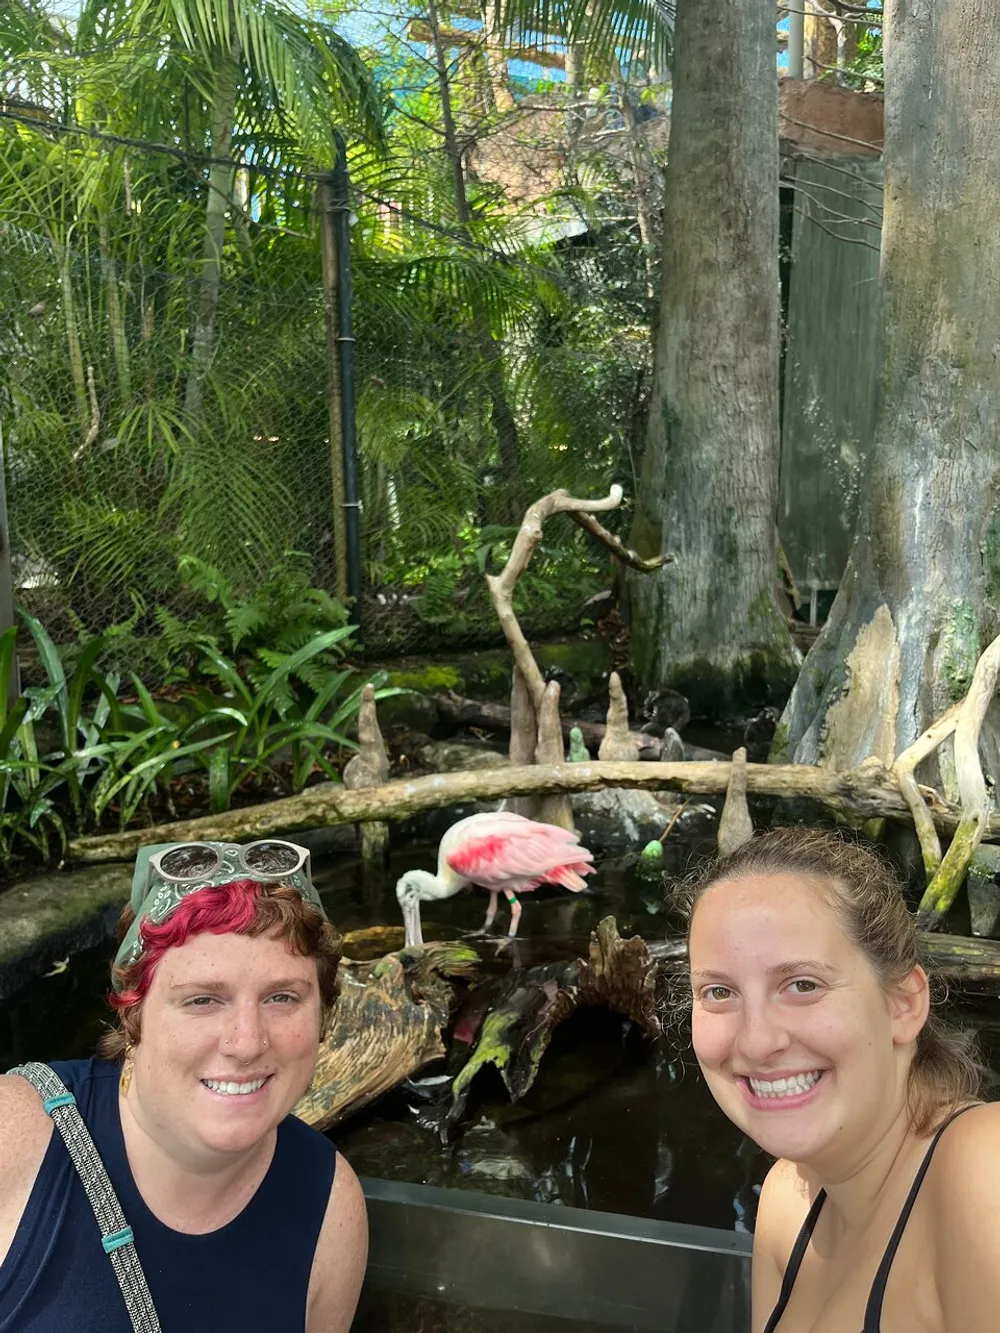 Two people are smiling for a selfie with a pink flamingo and lush greenery in the background